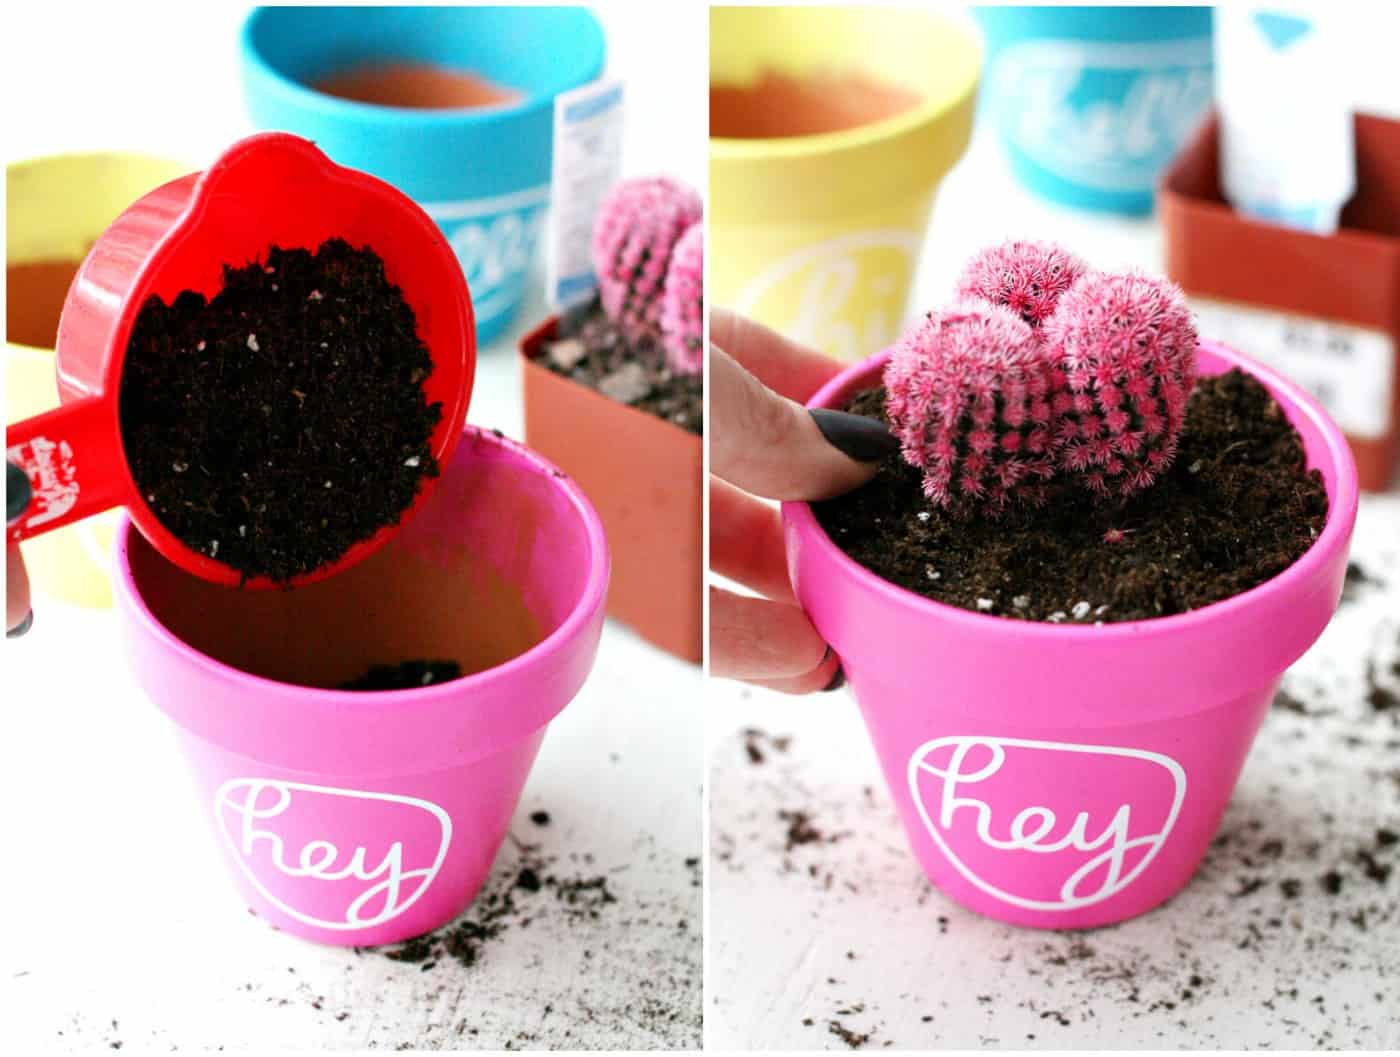 Planting the pink cactus in the pink pot